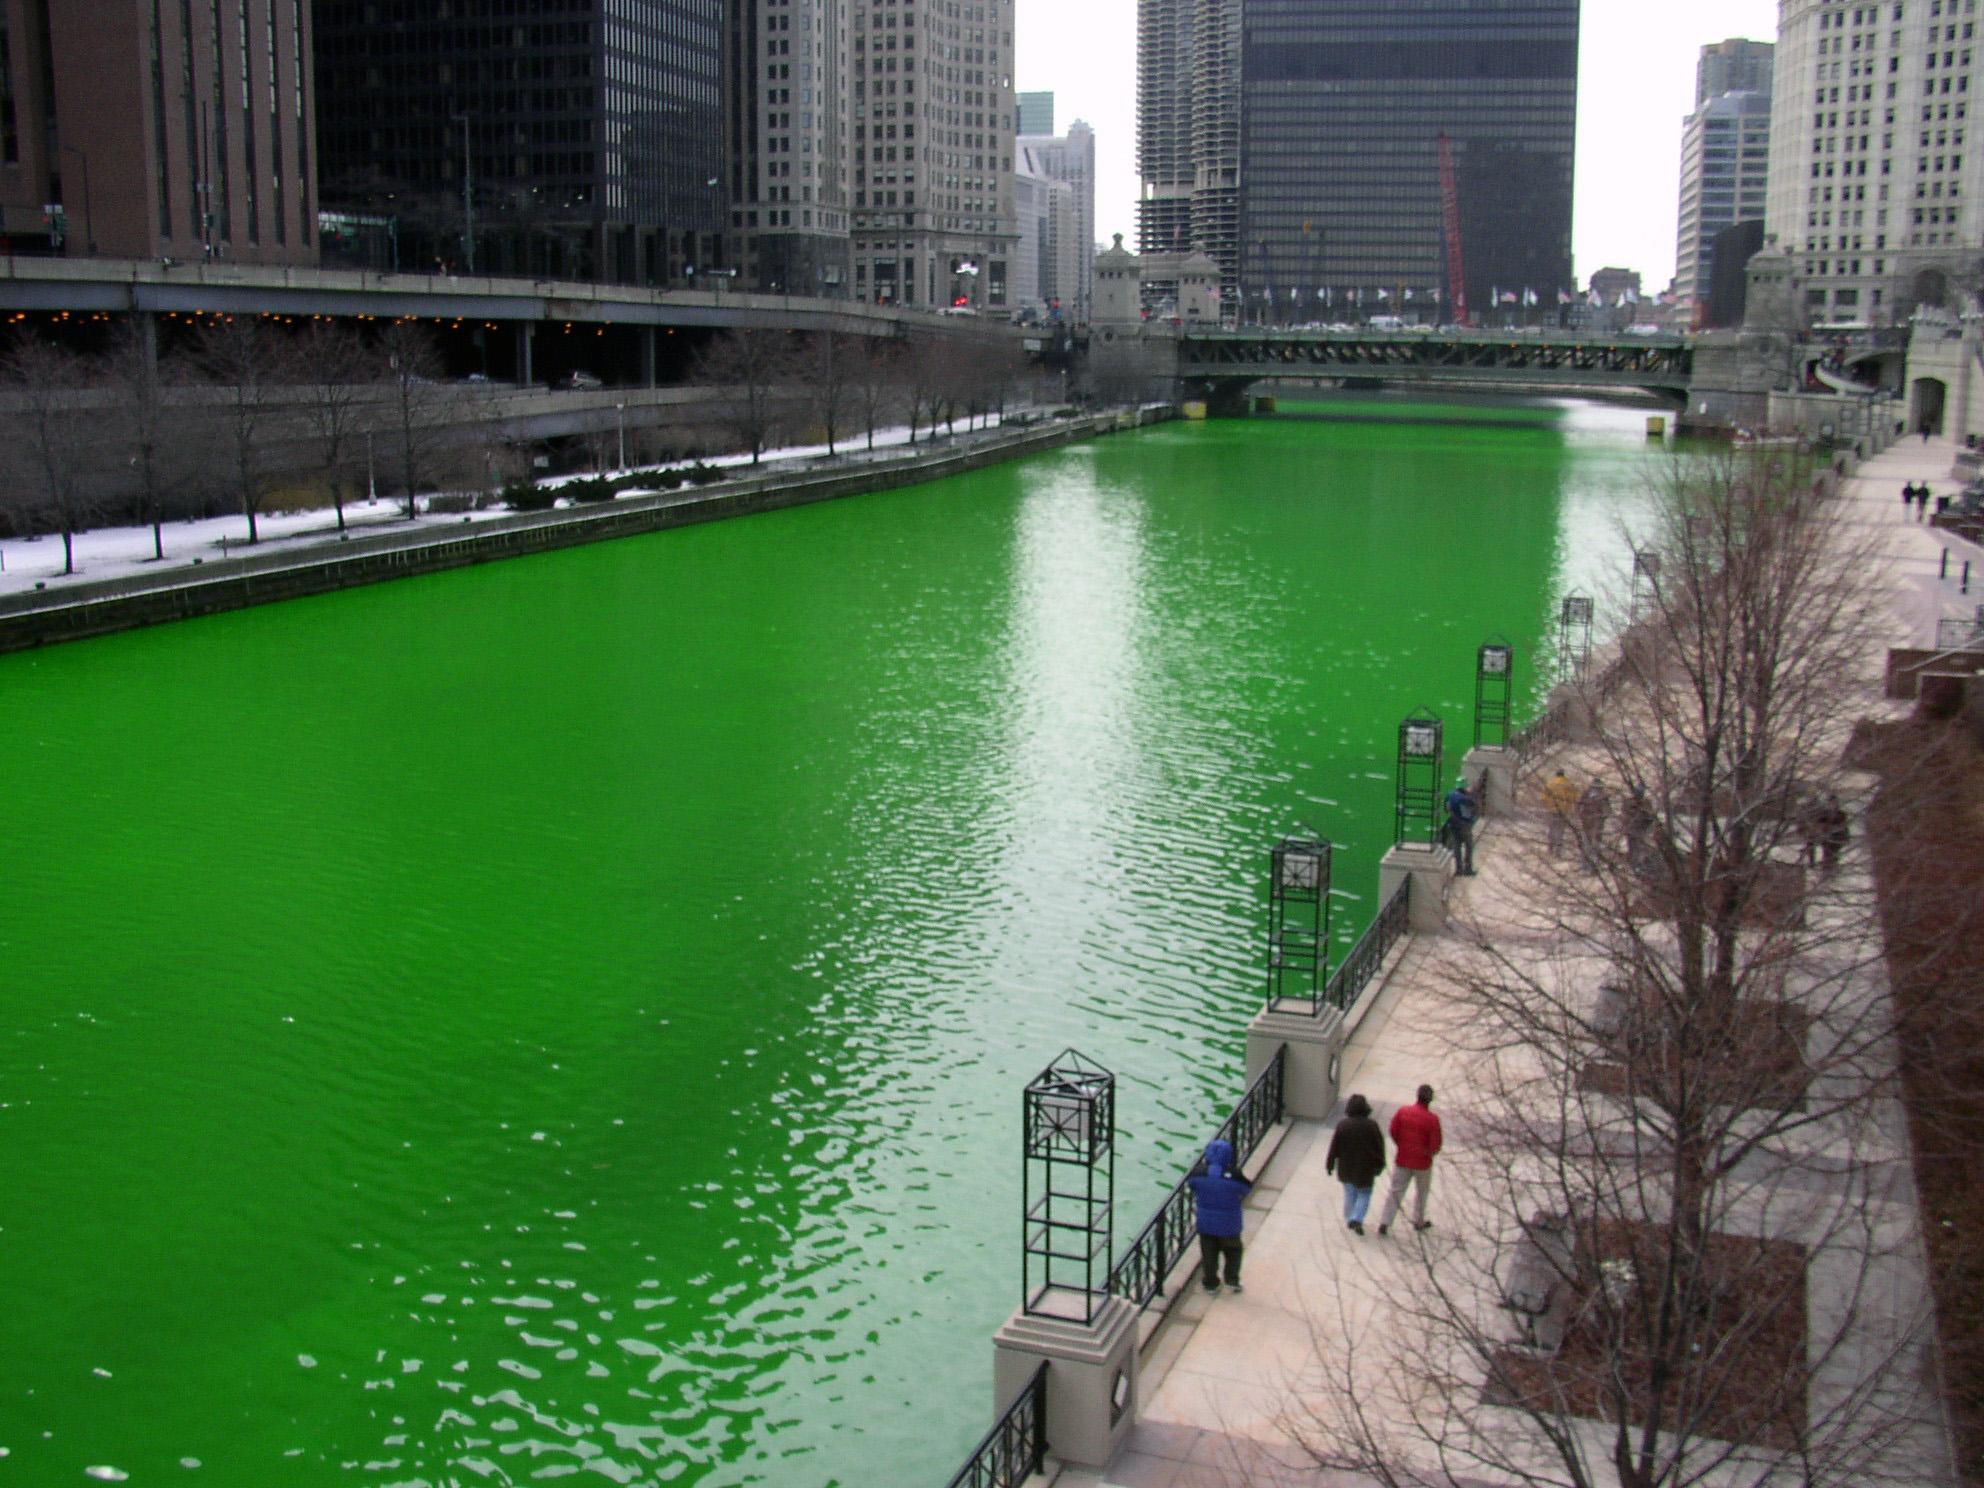 http://upload.wikimedia.org/wikipedia/commons/b/b6/Chicago_River_dyed_green%2C_focus_on_river.jpg